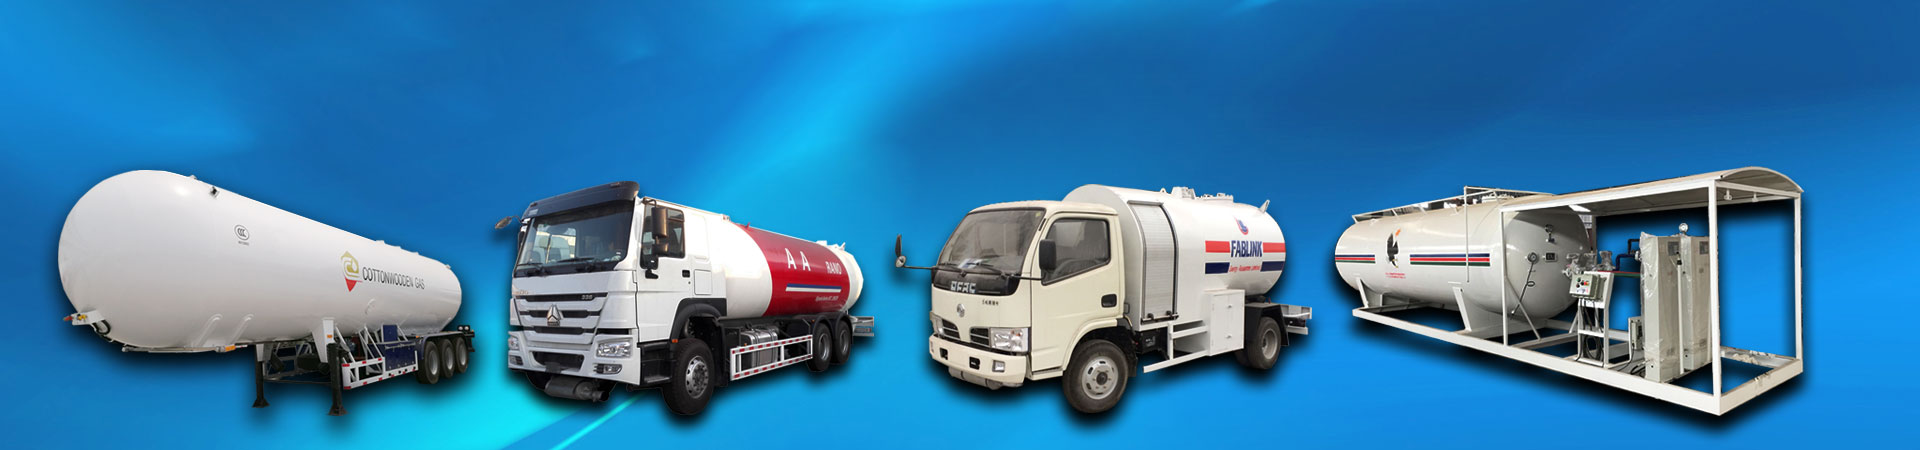 Reliable Manufacturer for LPG Tank Products